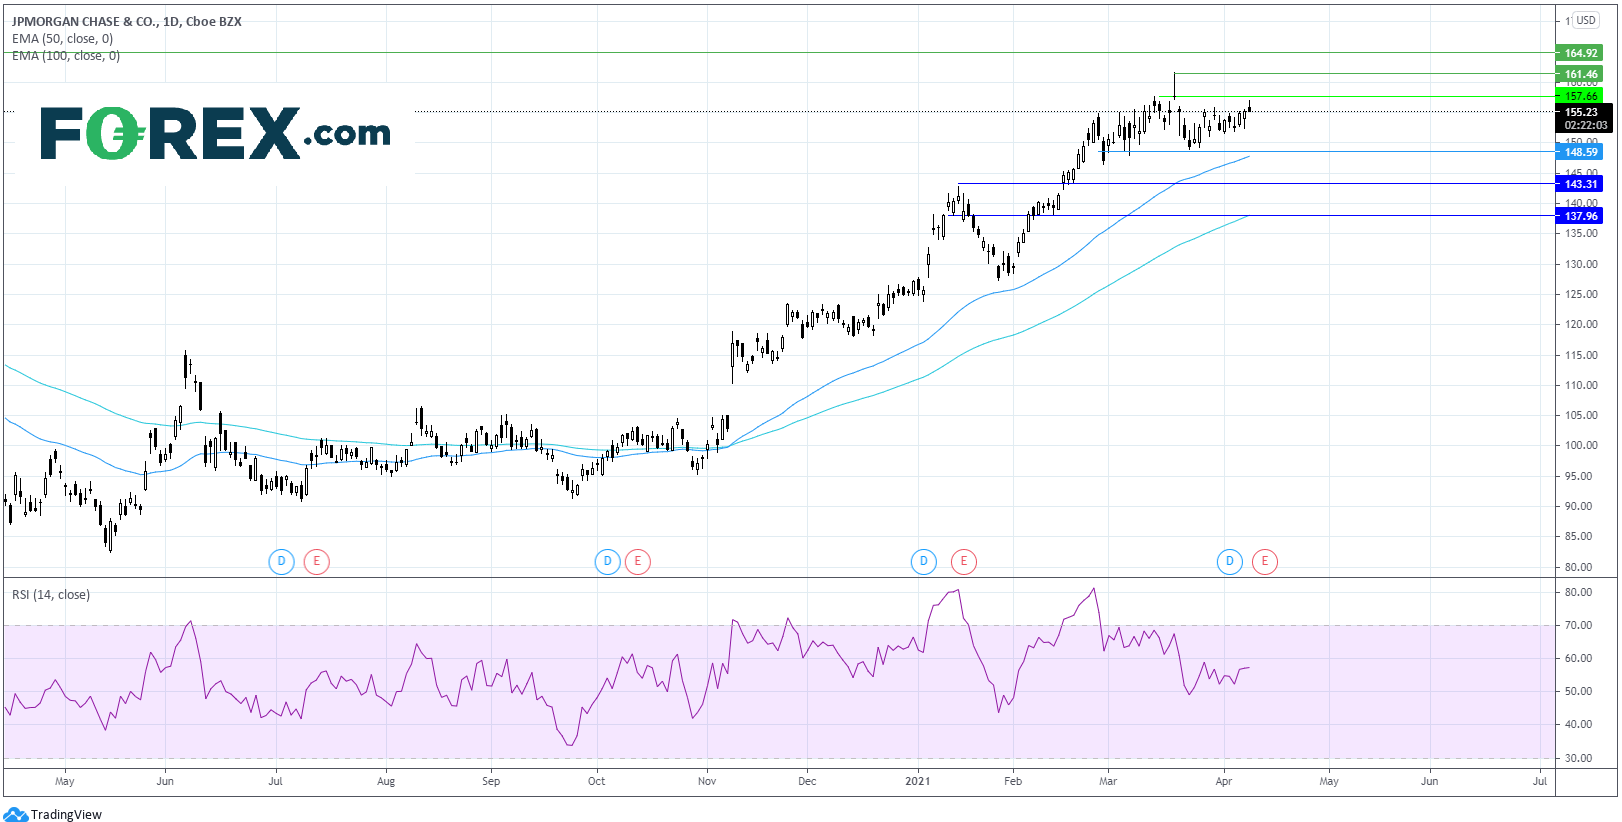 Chart analysis of J.P Morgan U.S Q1 Bank Earnings. Published in April 2021 by FOREX.com